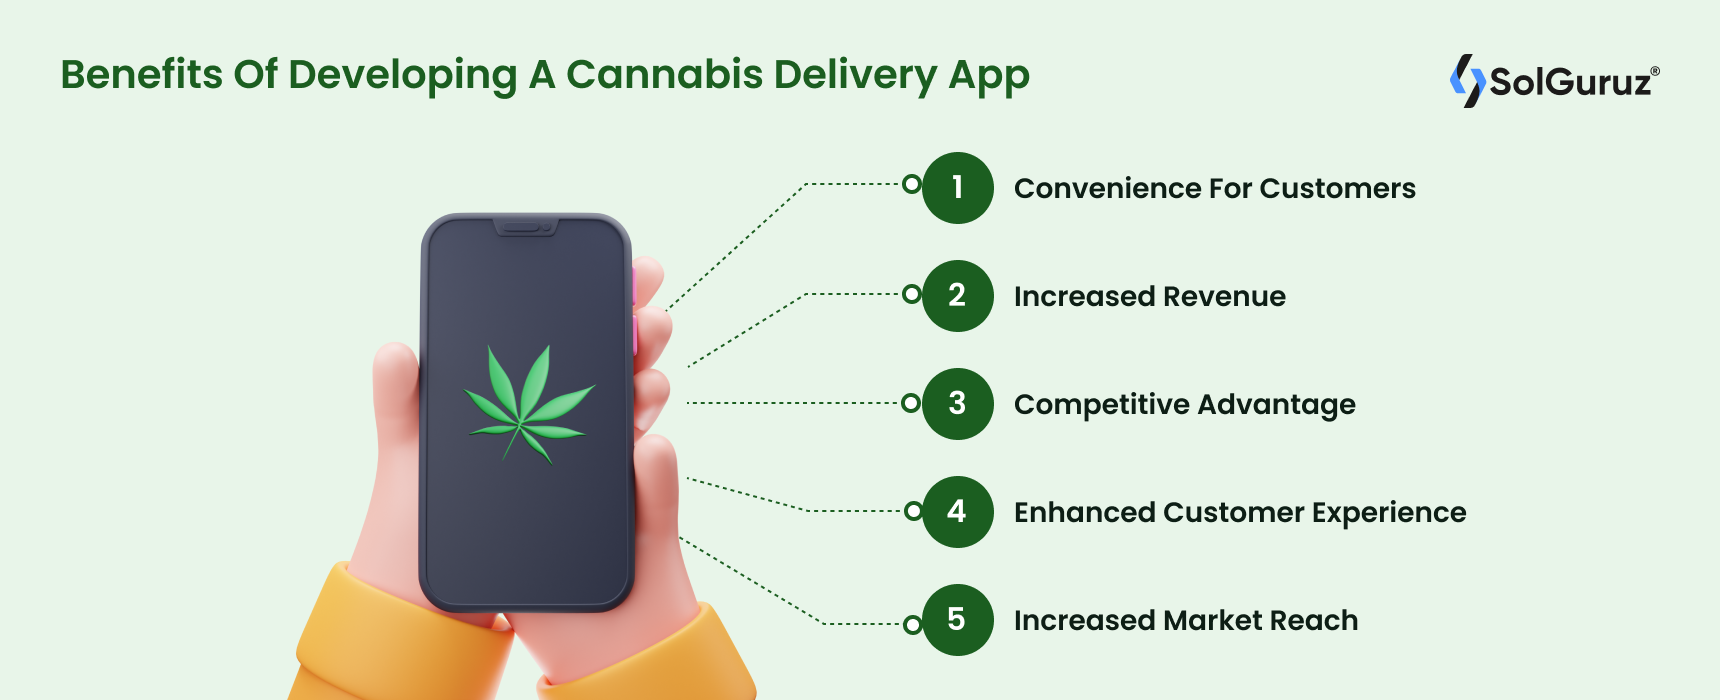 Benefits Of Developing A Cannabis Delivery App